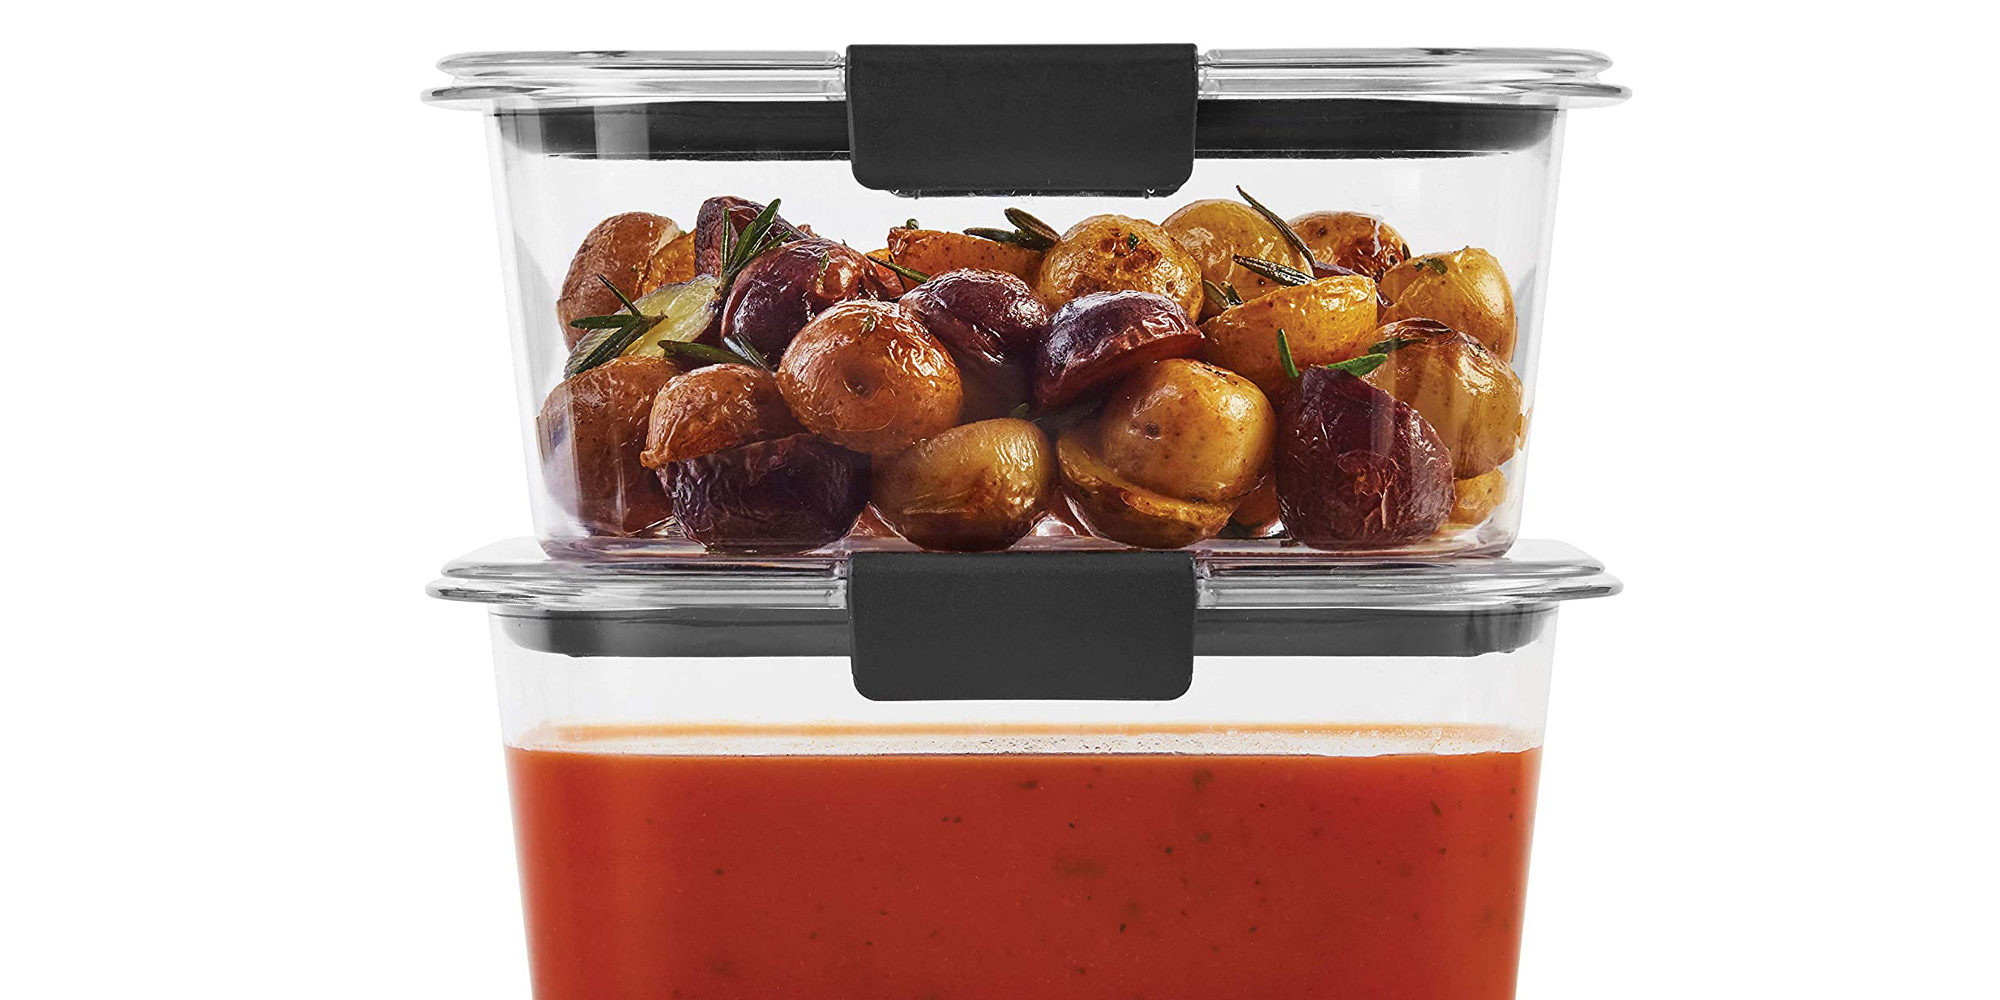 https://9to5toys.com/wp-content/uploads/sites/5/2022/05/Rubbermaid-Brilliance-Food-Storage-Container-set.jpg